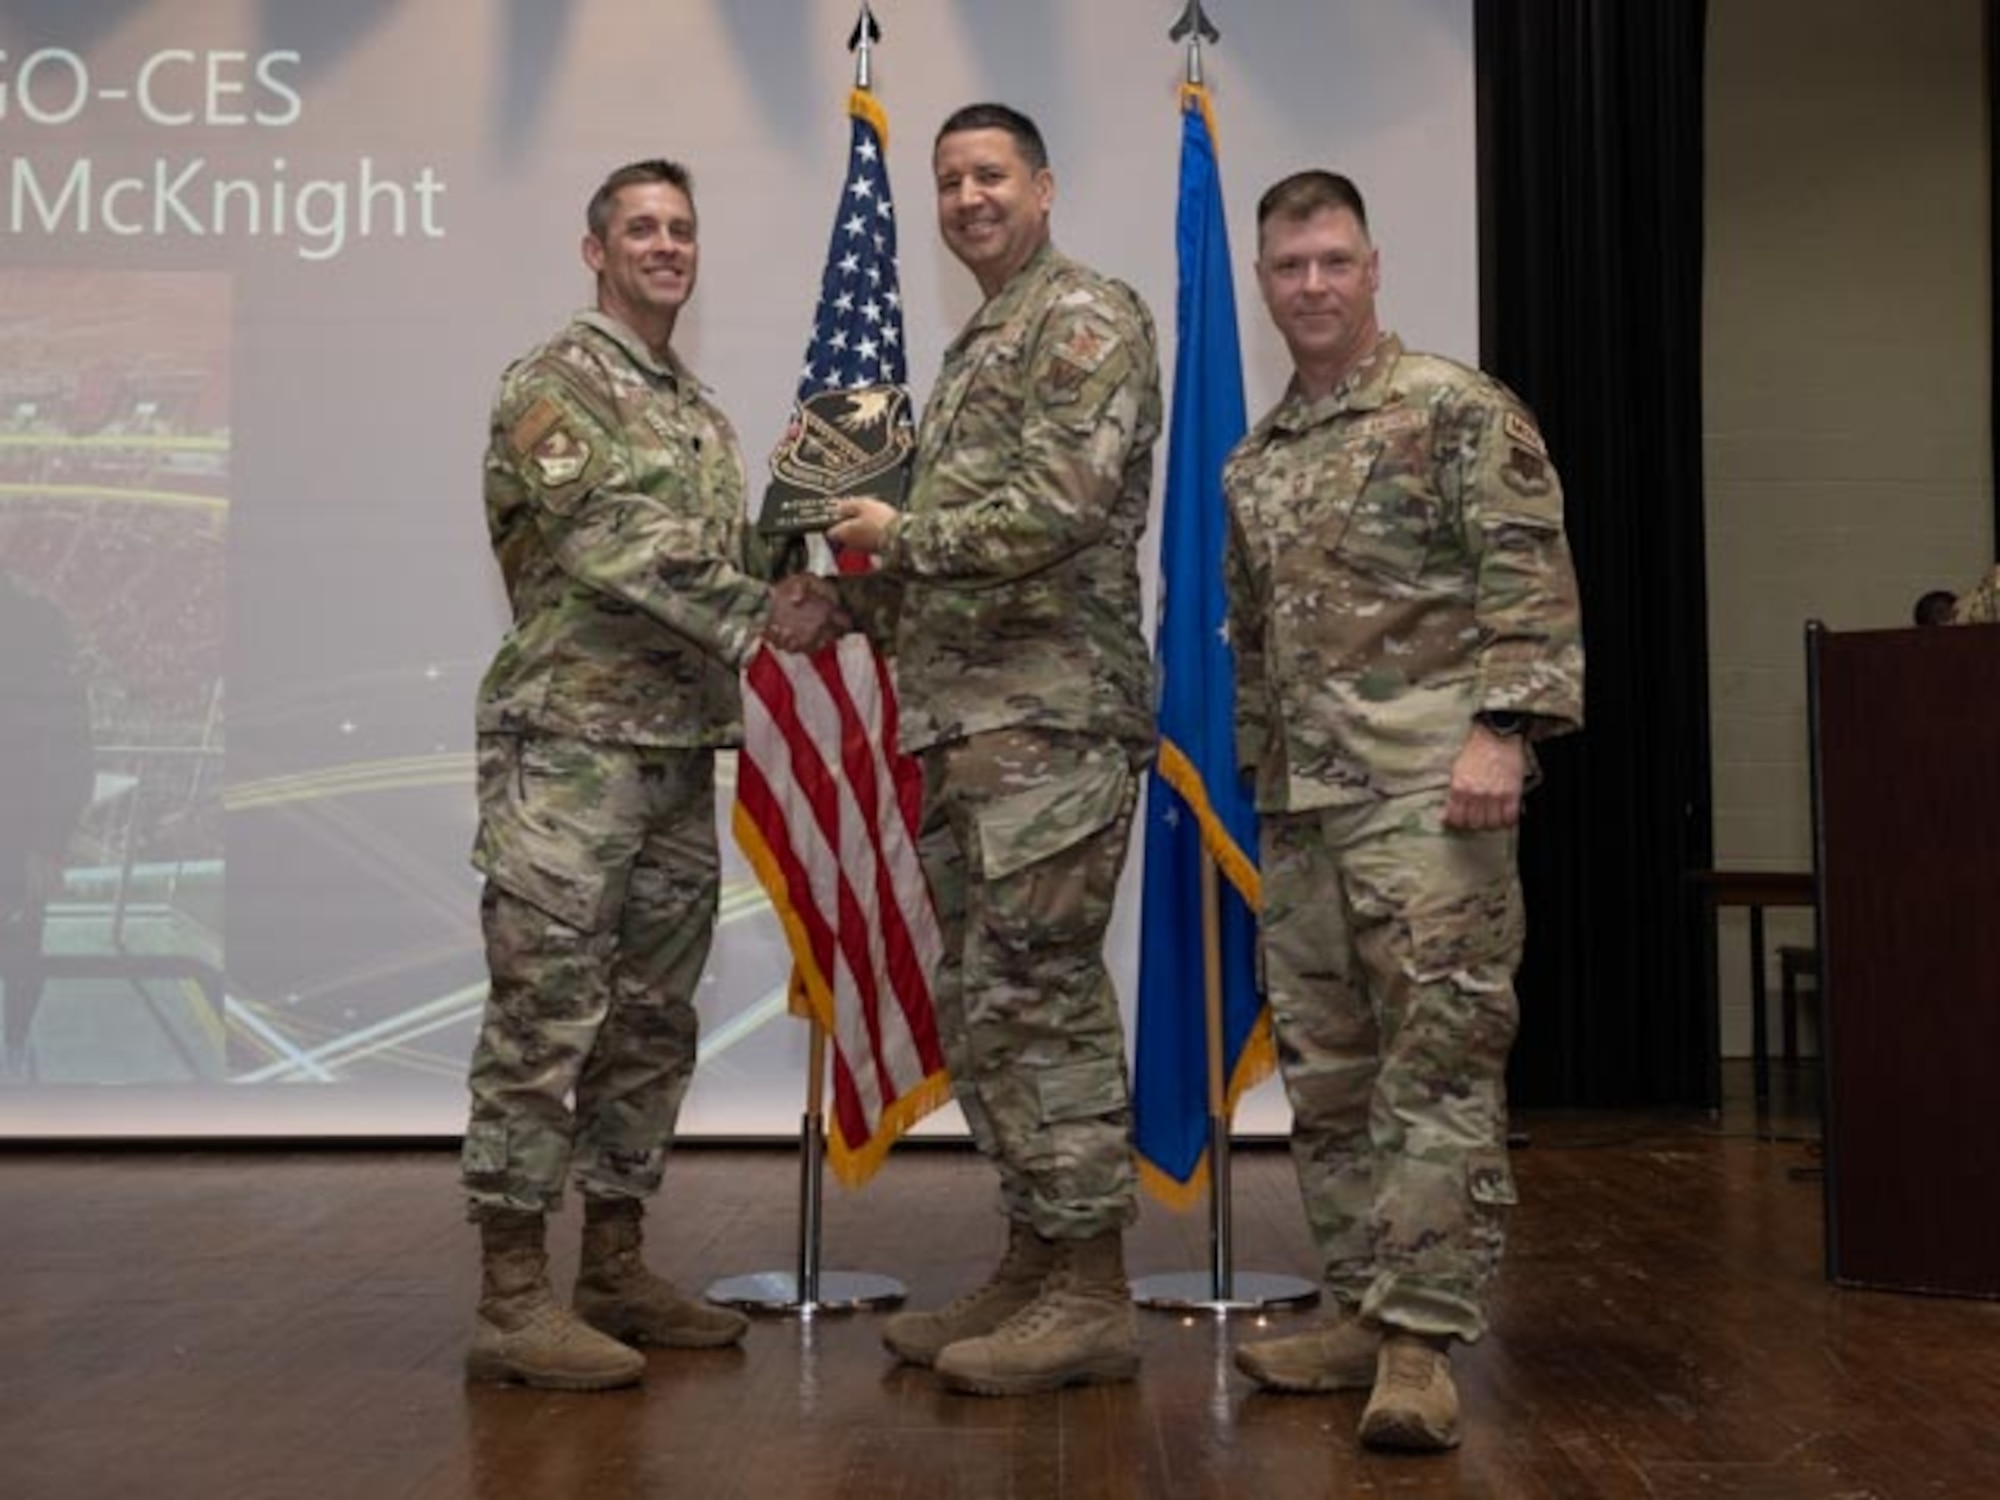 U.S. Air Force Lt. Col. James Melvin, left, Mission Support Group deputy commander, and Chief Master Sgt. Edward Mueller, right, Mission Support Group senior enlisted leader, Col. Hans Winkler, center,  who accepts the award on behalf of 1st Lt. Kenneth McKnight, officer in charge of program development, Junior Company Grade Officer of the First Quarter Award at Seymour Johnson Air Force Base, North Carolina, April 19, 2024. The ceremony recognized 10 individual award winners and one team for outstanding performance. (U.S. Air Force photo by Airman Megan Cusmano)